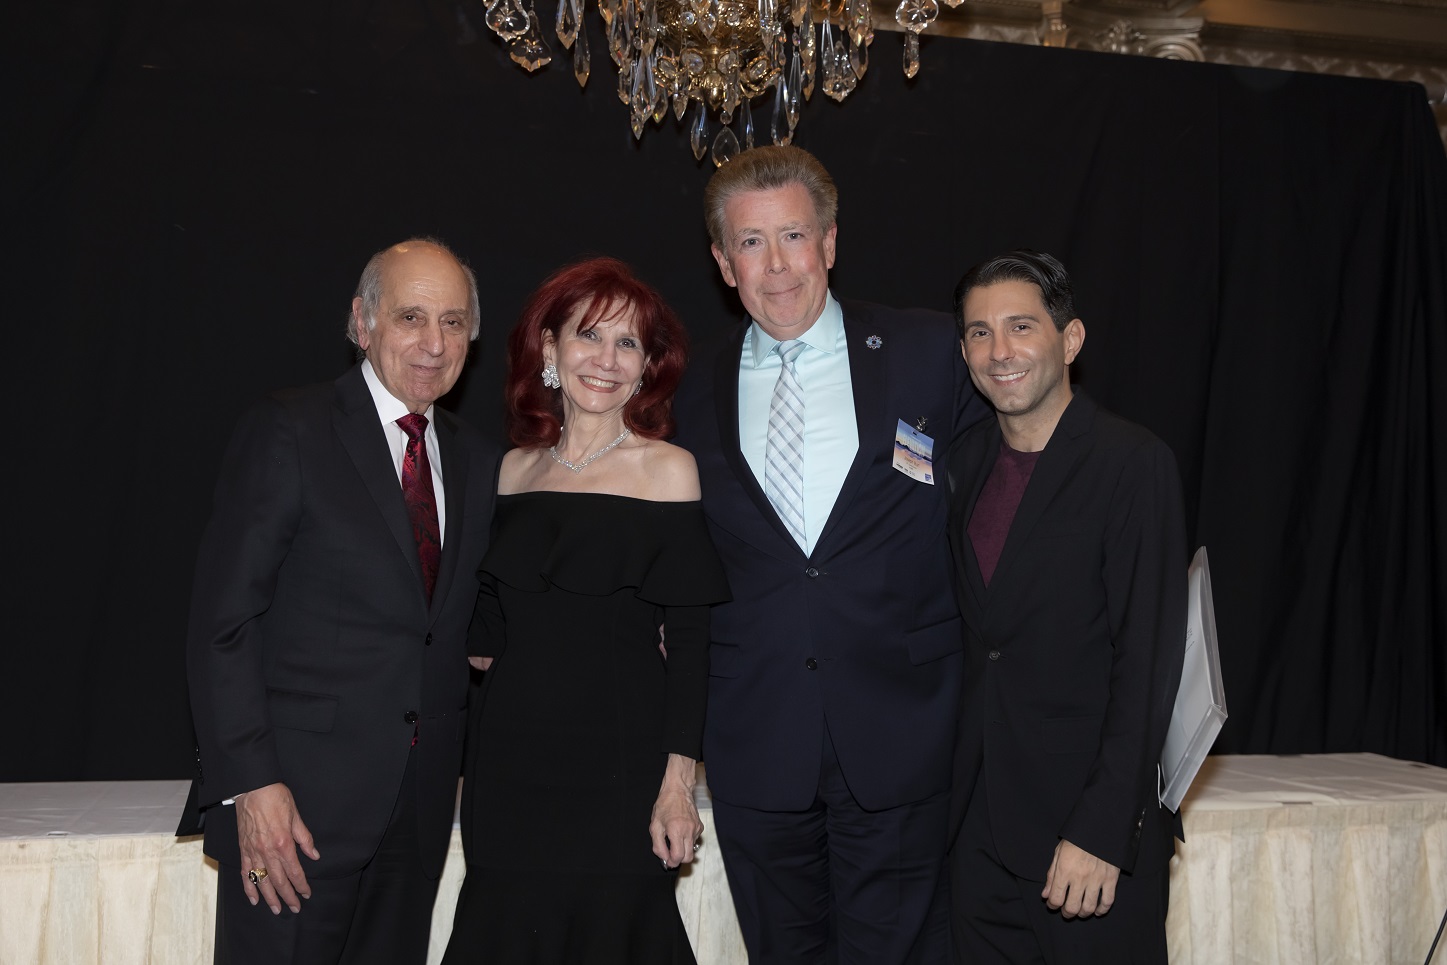 The Cannata Report’s 34th Annual Awards & Charities Dinner Raises $295,000 for Tackle Kids Cancer